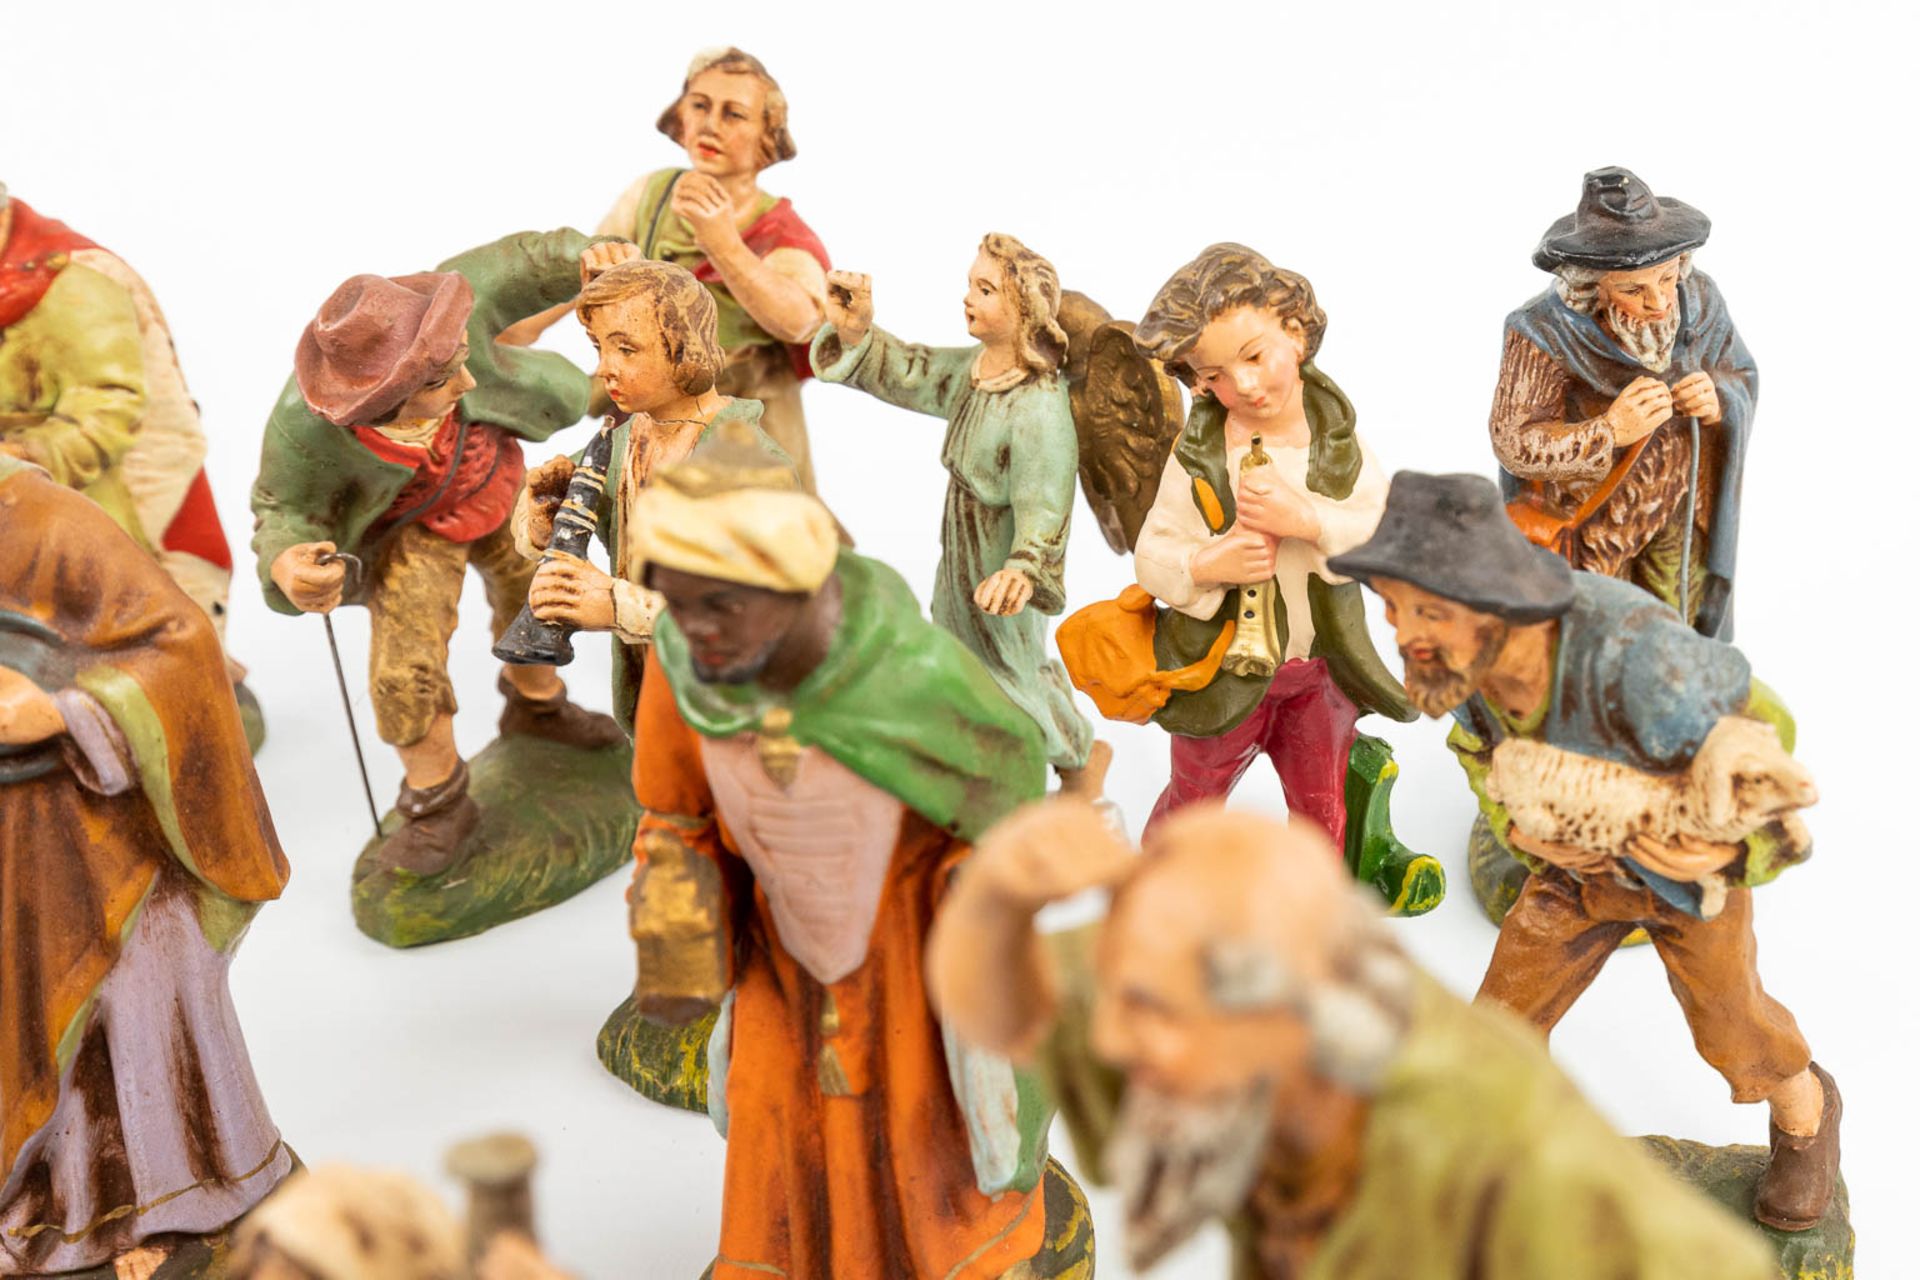 A large and extended Nativity scene with figurines and animals made of papier maché. - Image 14 of 20